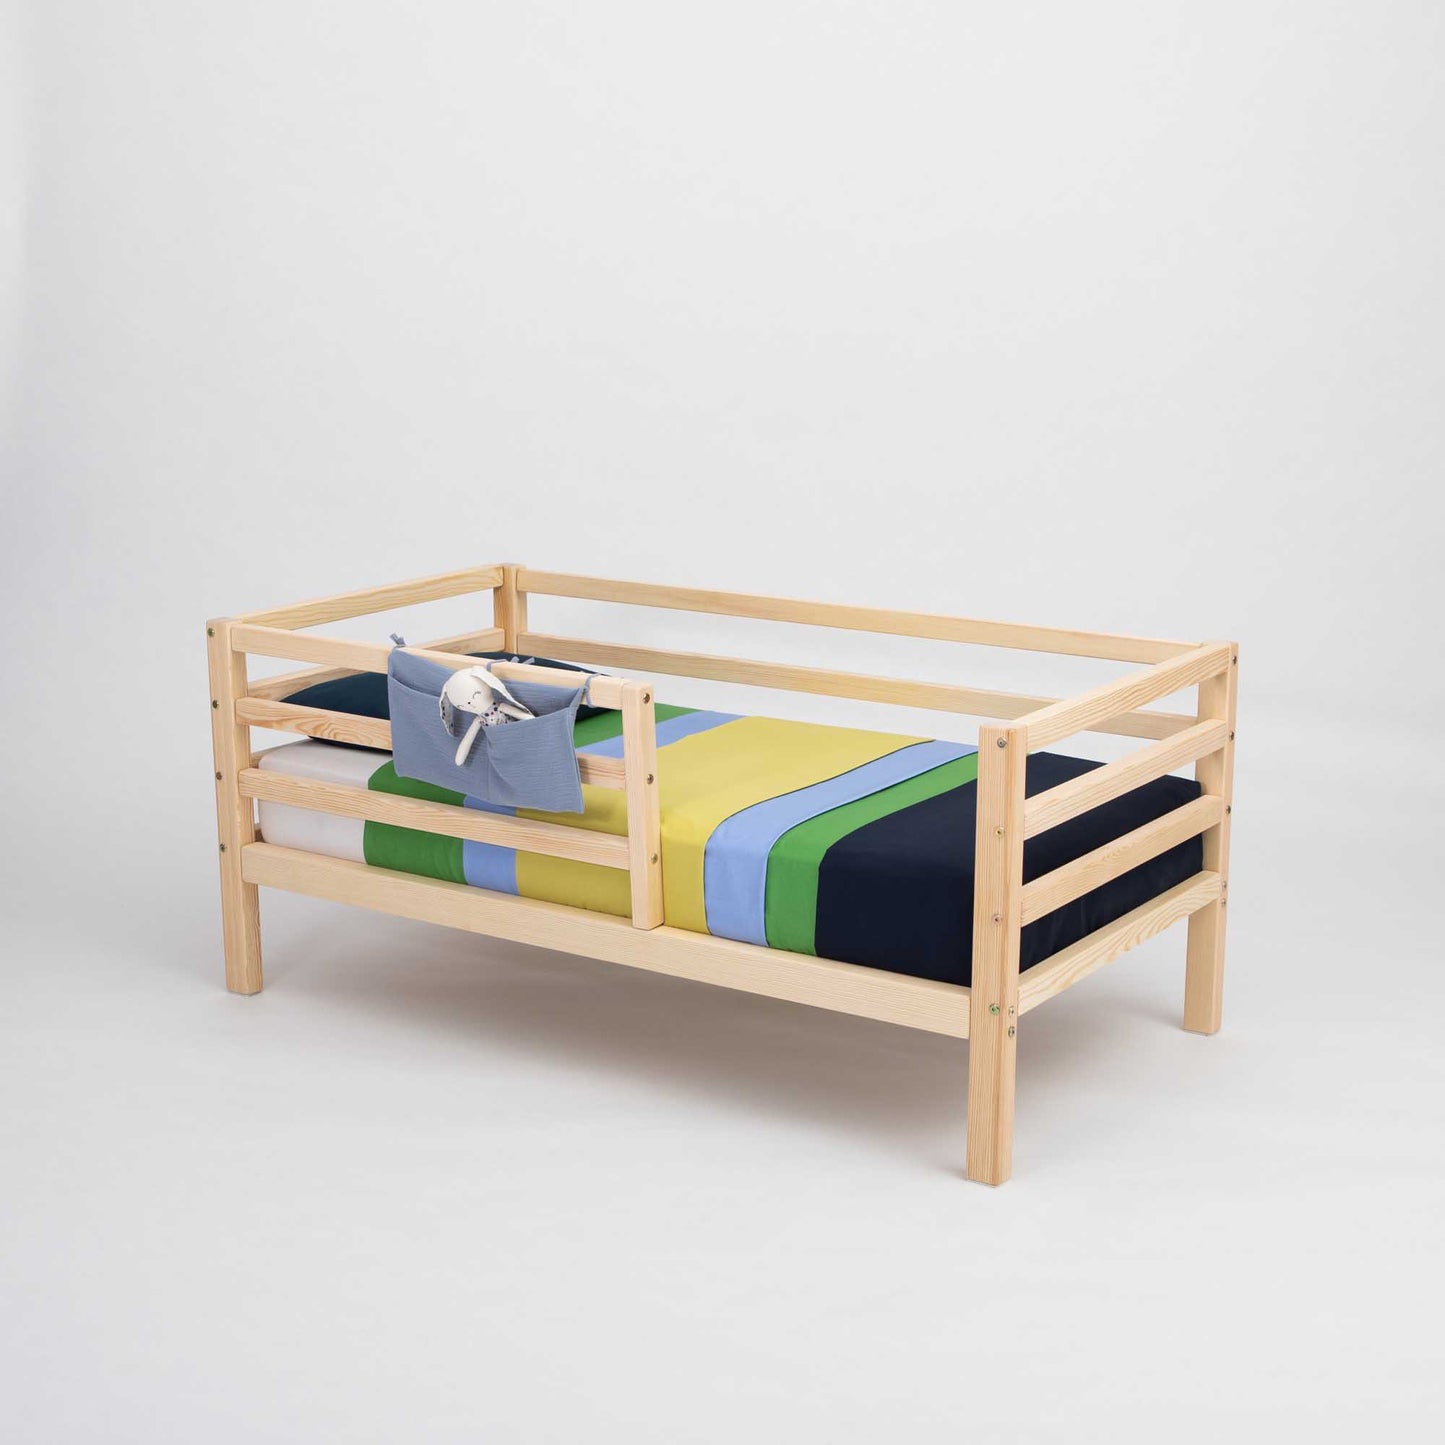 A 2-in-1 transformable kids' bed with a horizontal rail fence from Sweet Home From Wood, with a colorful striped blanket.